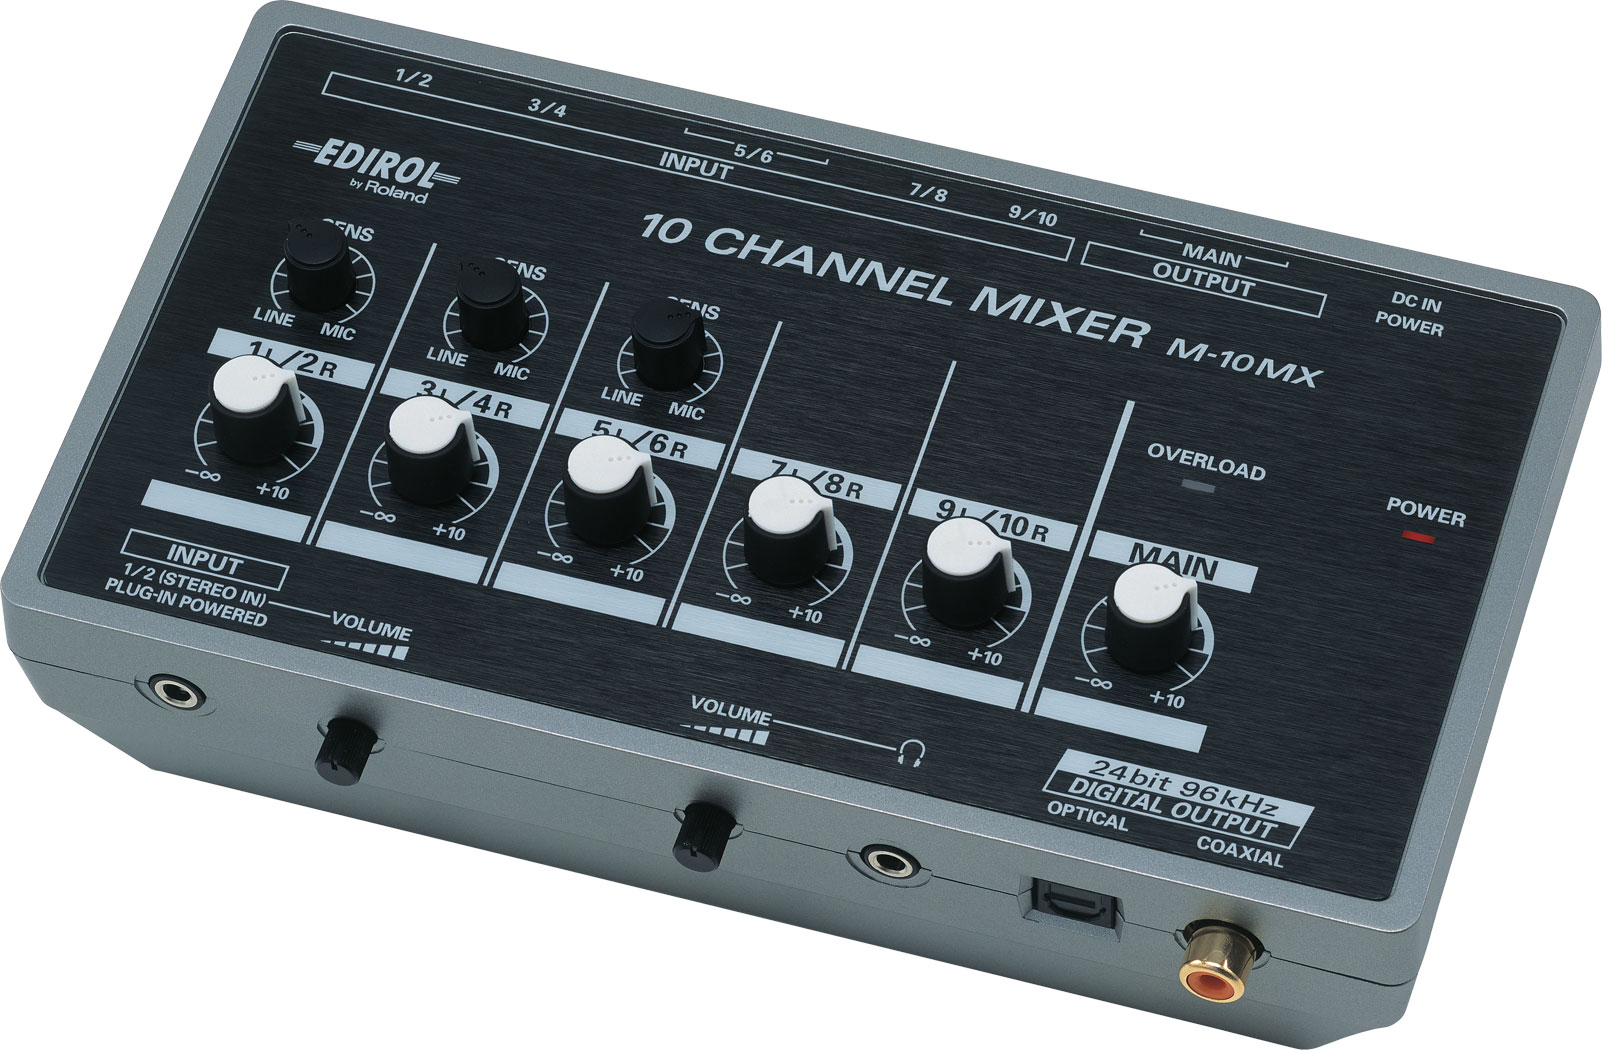 SALE Ends Oct 31] Edirol M-10MX BatteryPowered Compact 10ch Mobile Mixer  Roland w/ 100-240V PSU